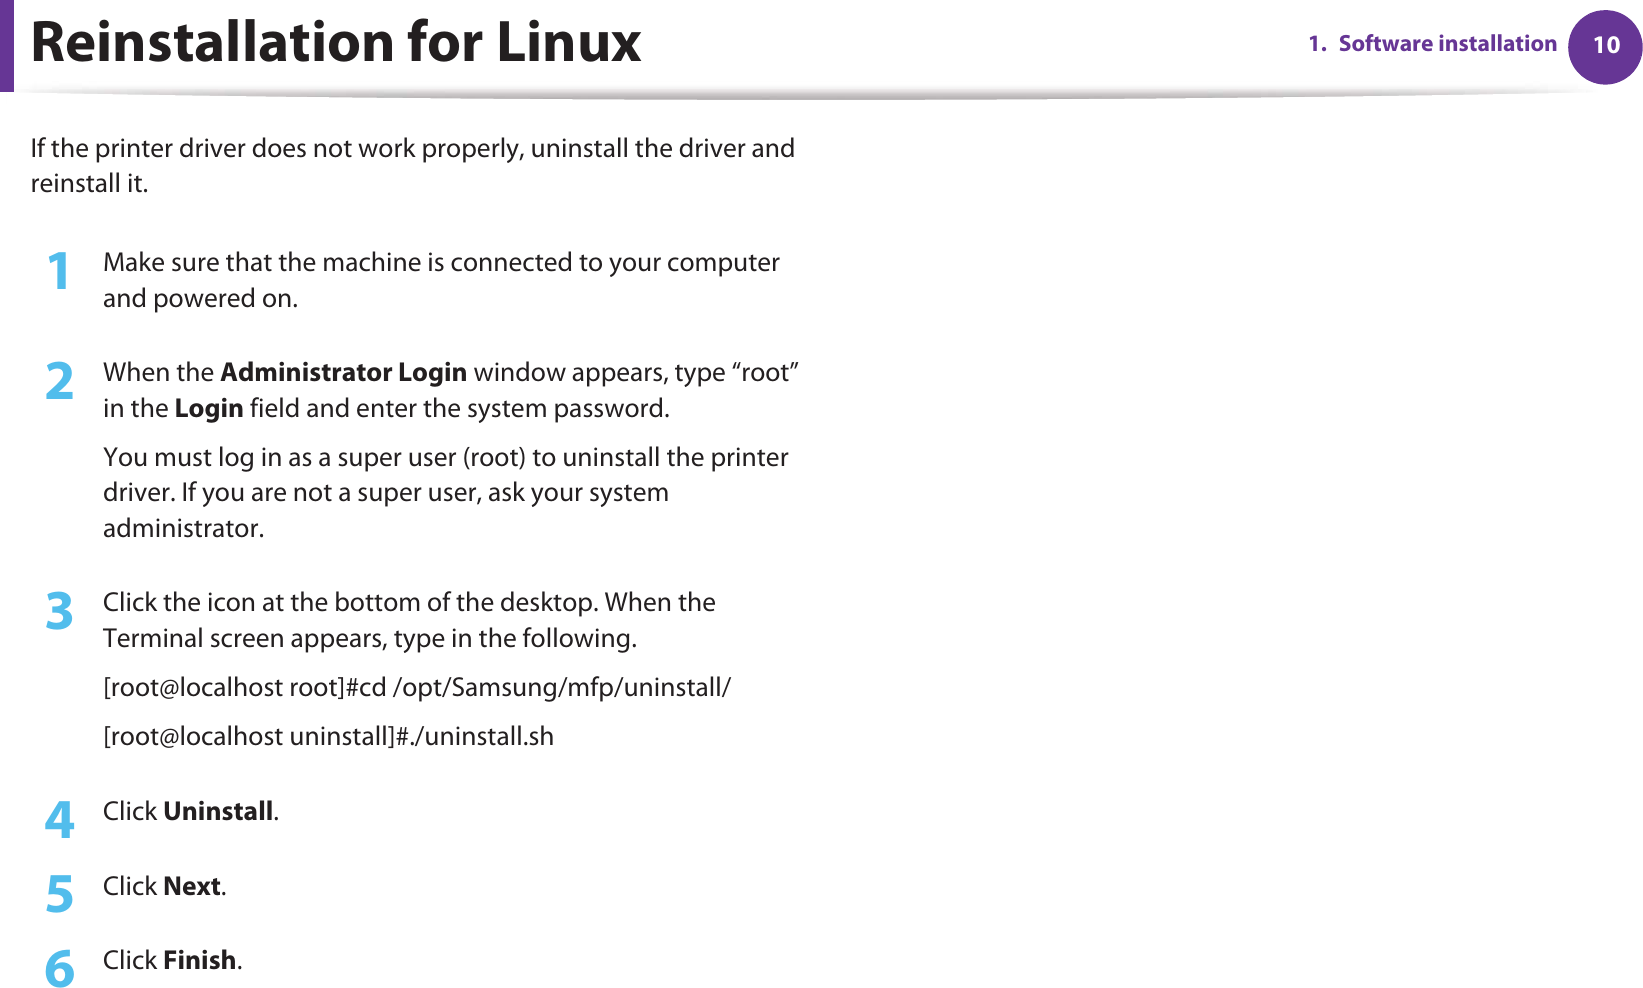 101. Software installationReinstallation for LinuxIf the printer driver does not work properly, uninstall the driver and reinstall it.1Make sure that the machine is connected to your computer and powered on.2  When the Administrator Login window appears, type “root” in the Login field and enter the system password.You must log in as a super user (root) to uninstall the printer driver. If you are not a super user, ask your system administrator.3  Click the icon at the bottom of the desktop. When the Terminal screen appears, type in the following.[root@localhost root]#cd /opt/Samsung/mfp/uninstall/[root@localhost uninstall]#./uninstall.sh4  Click Uninstall.5  Click Next.6  Click Finish.